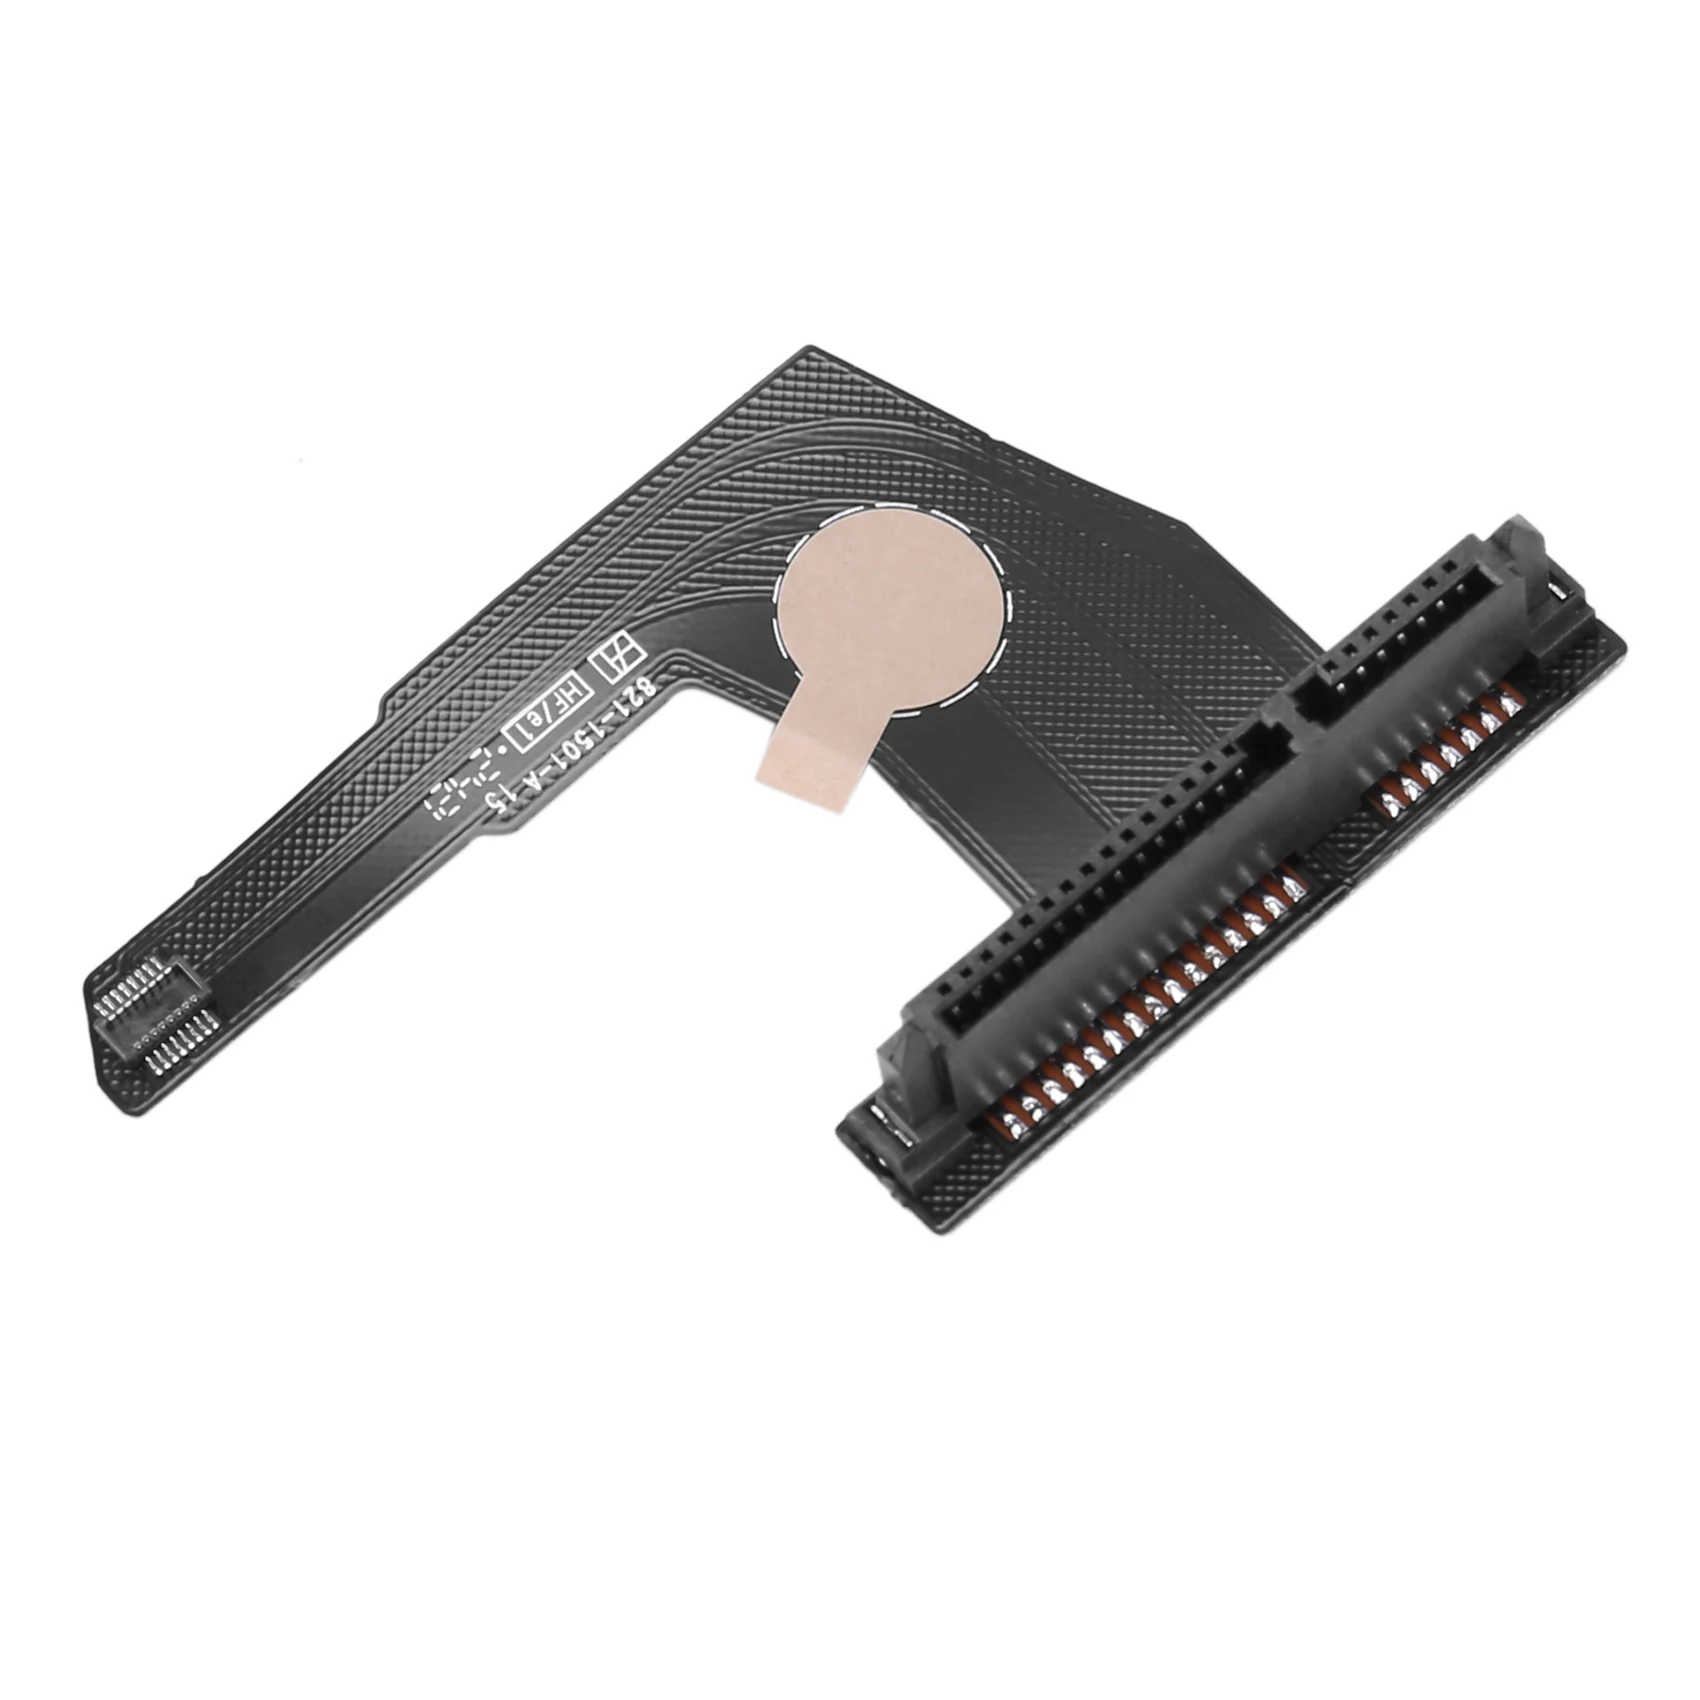 New Dual Hard Drive HDD DISK SSD Flex Cable Replacement for Mac Mini A1347 Server 076-1412 922-9560